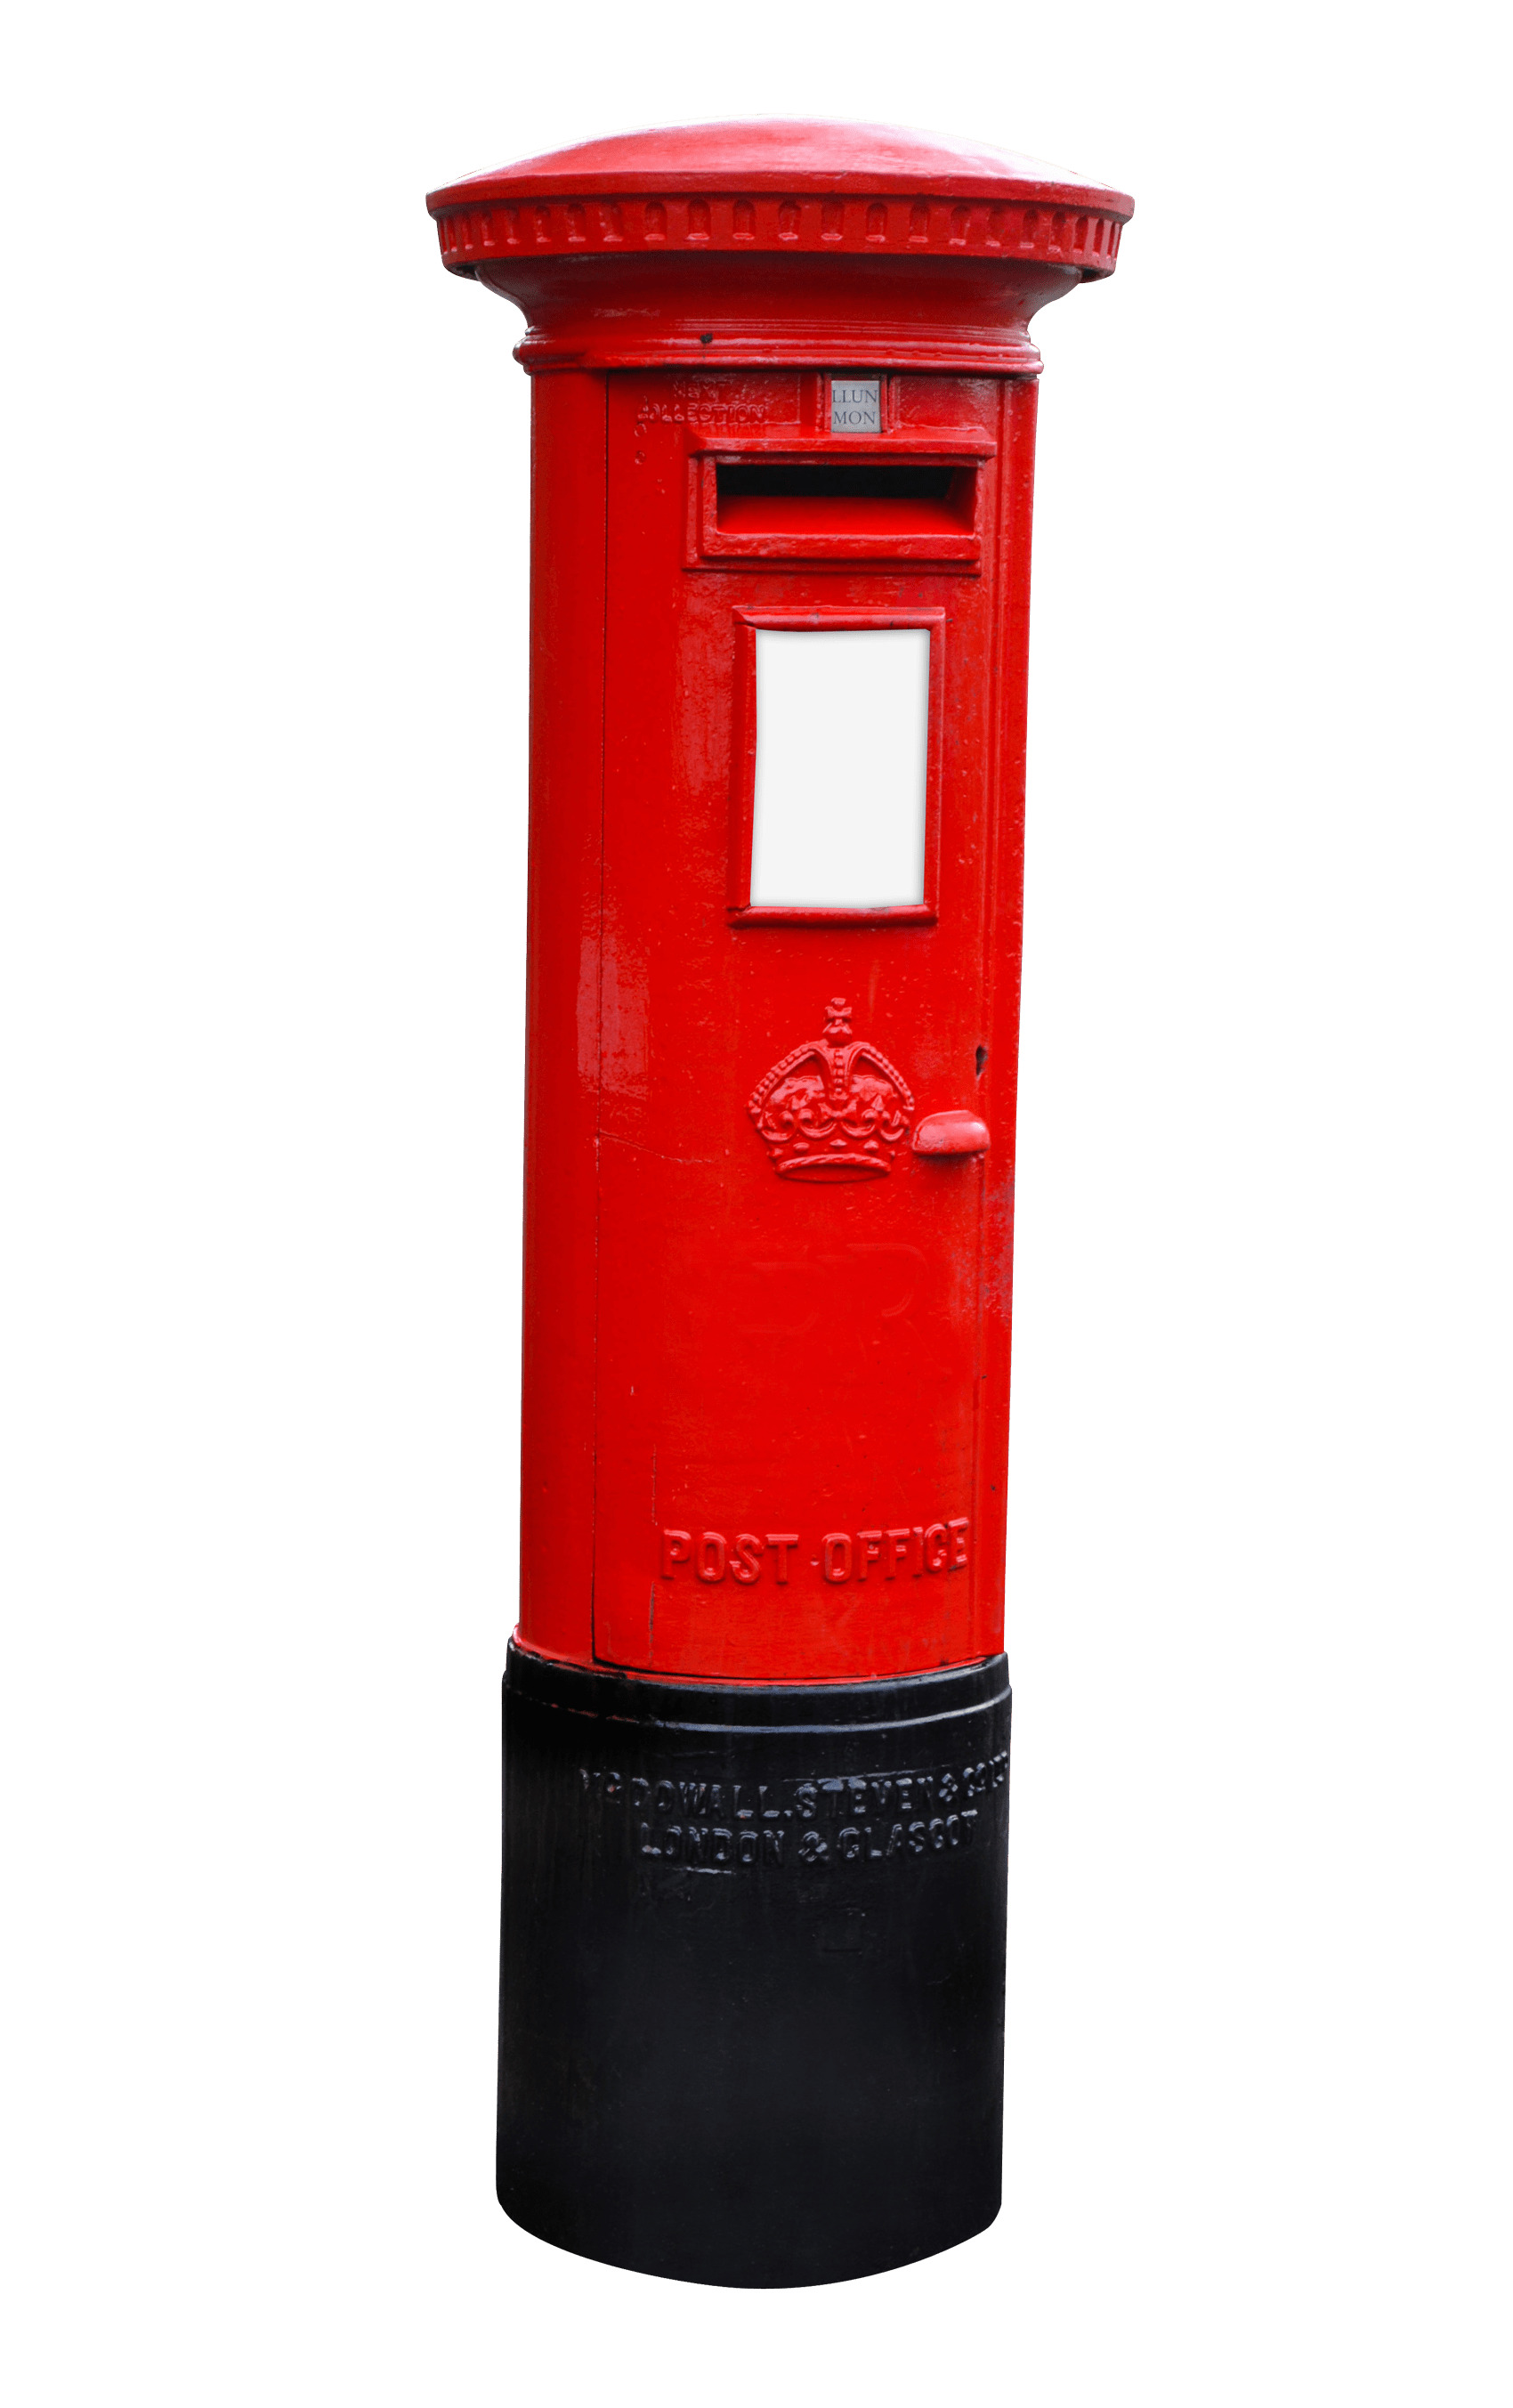 Cylinder Postbox icons